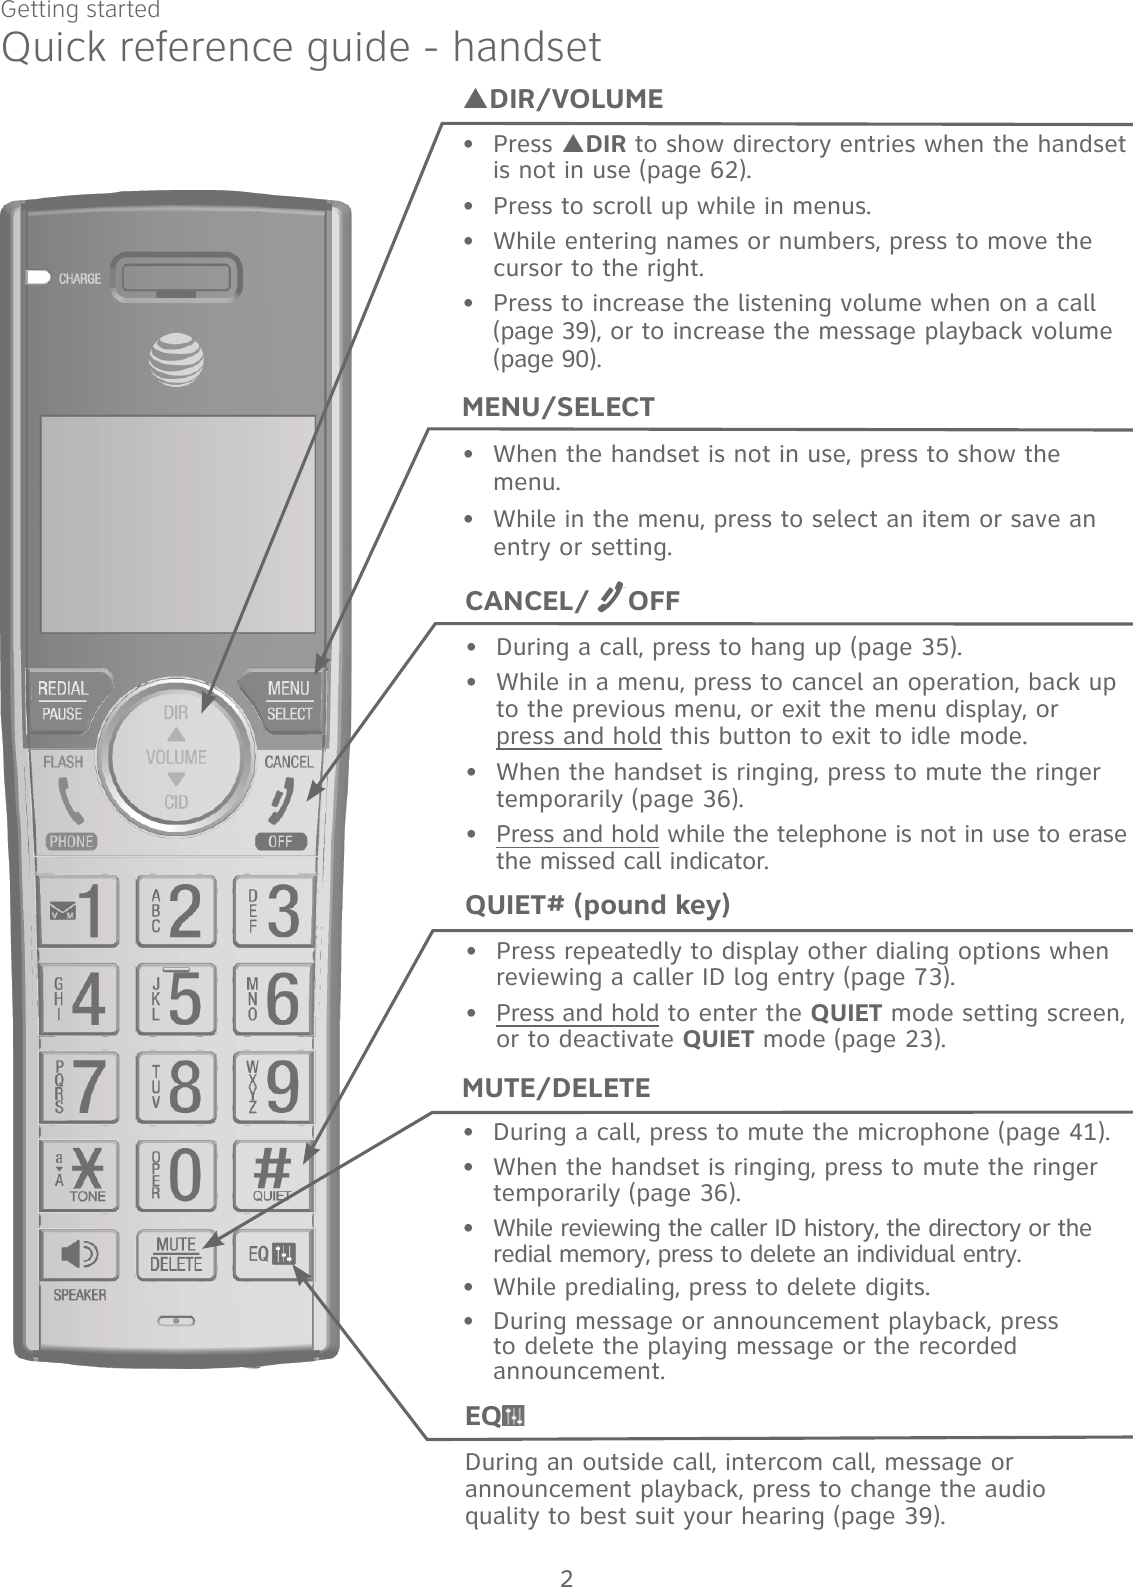 Quick reference guide - handsetSDIR/VOLUMEPress SDIR to show directory entries when the handset is not in use (page 62).Press to scroll up while in menus. While entering names or numbers, press to move the   cursor to the right. Press to increase the listening volume when on a call   (page 39), or to increase the message playback volume  (page 90).••••MENU/SELECTWhen the handset is not in use, press to show the menu. While in the menu, press to select an item or save an entry or setting.••CANCEL/  OFFDuring a call, press to hang up (page 35).While in a menu, press to cancel an operation, back up to the previous menu, or exit the menu display, or  press and hold this button to exit to idle mode.When the handset is ringing, press to mute the ringer temporarily (page 36).Press and hold while the telephone is not in use to erase the missed call indicator.••••QUIET# (pound key)Press repeatedly to display other dialing options when reviewing a caller ID log entry (page 73).Press and hold to enter the QUIET mode setting screen, or to deactivate QUIET mode (page 23).••MUTE/DELETEDuring a call, press to mute the microphone (page 41).When the handset is ringing, press to mute the ringer temporarily (page 36).While reviewing the caller ID history, the directory or the redial memory, press to delete an individual entry.While predialing, press to delete digits.During message or announcement playback, press to delete the playing message or the recorded announcement.•••••EQDuring an outside call, intercom call, message or announcement playback, press to change the audio  quality to best suit your hearing (page 39). Getting started2